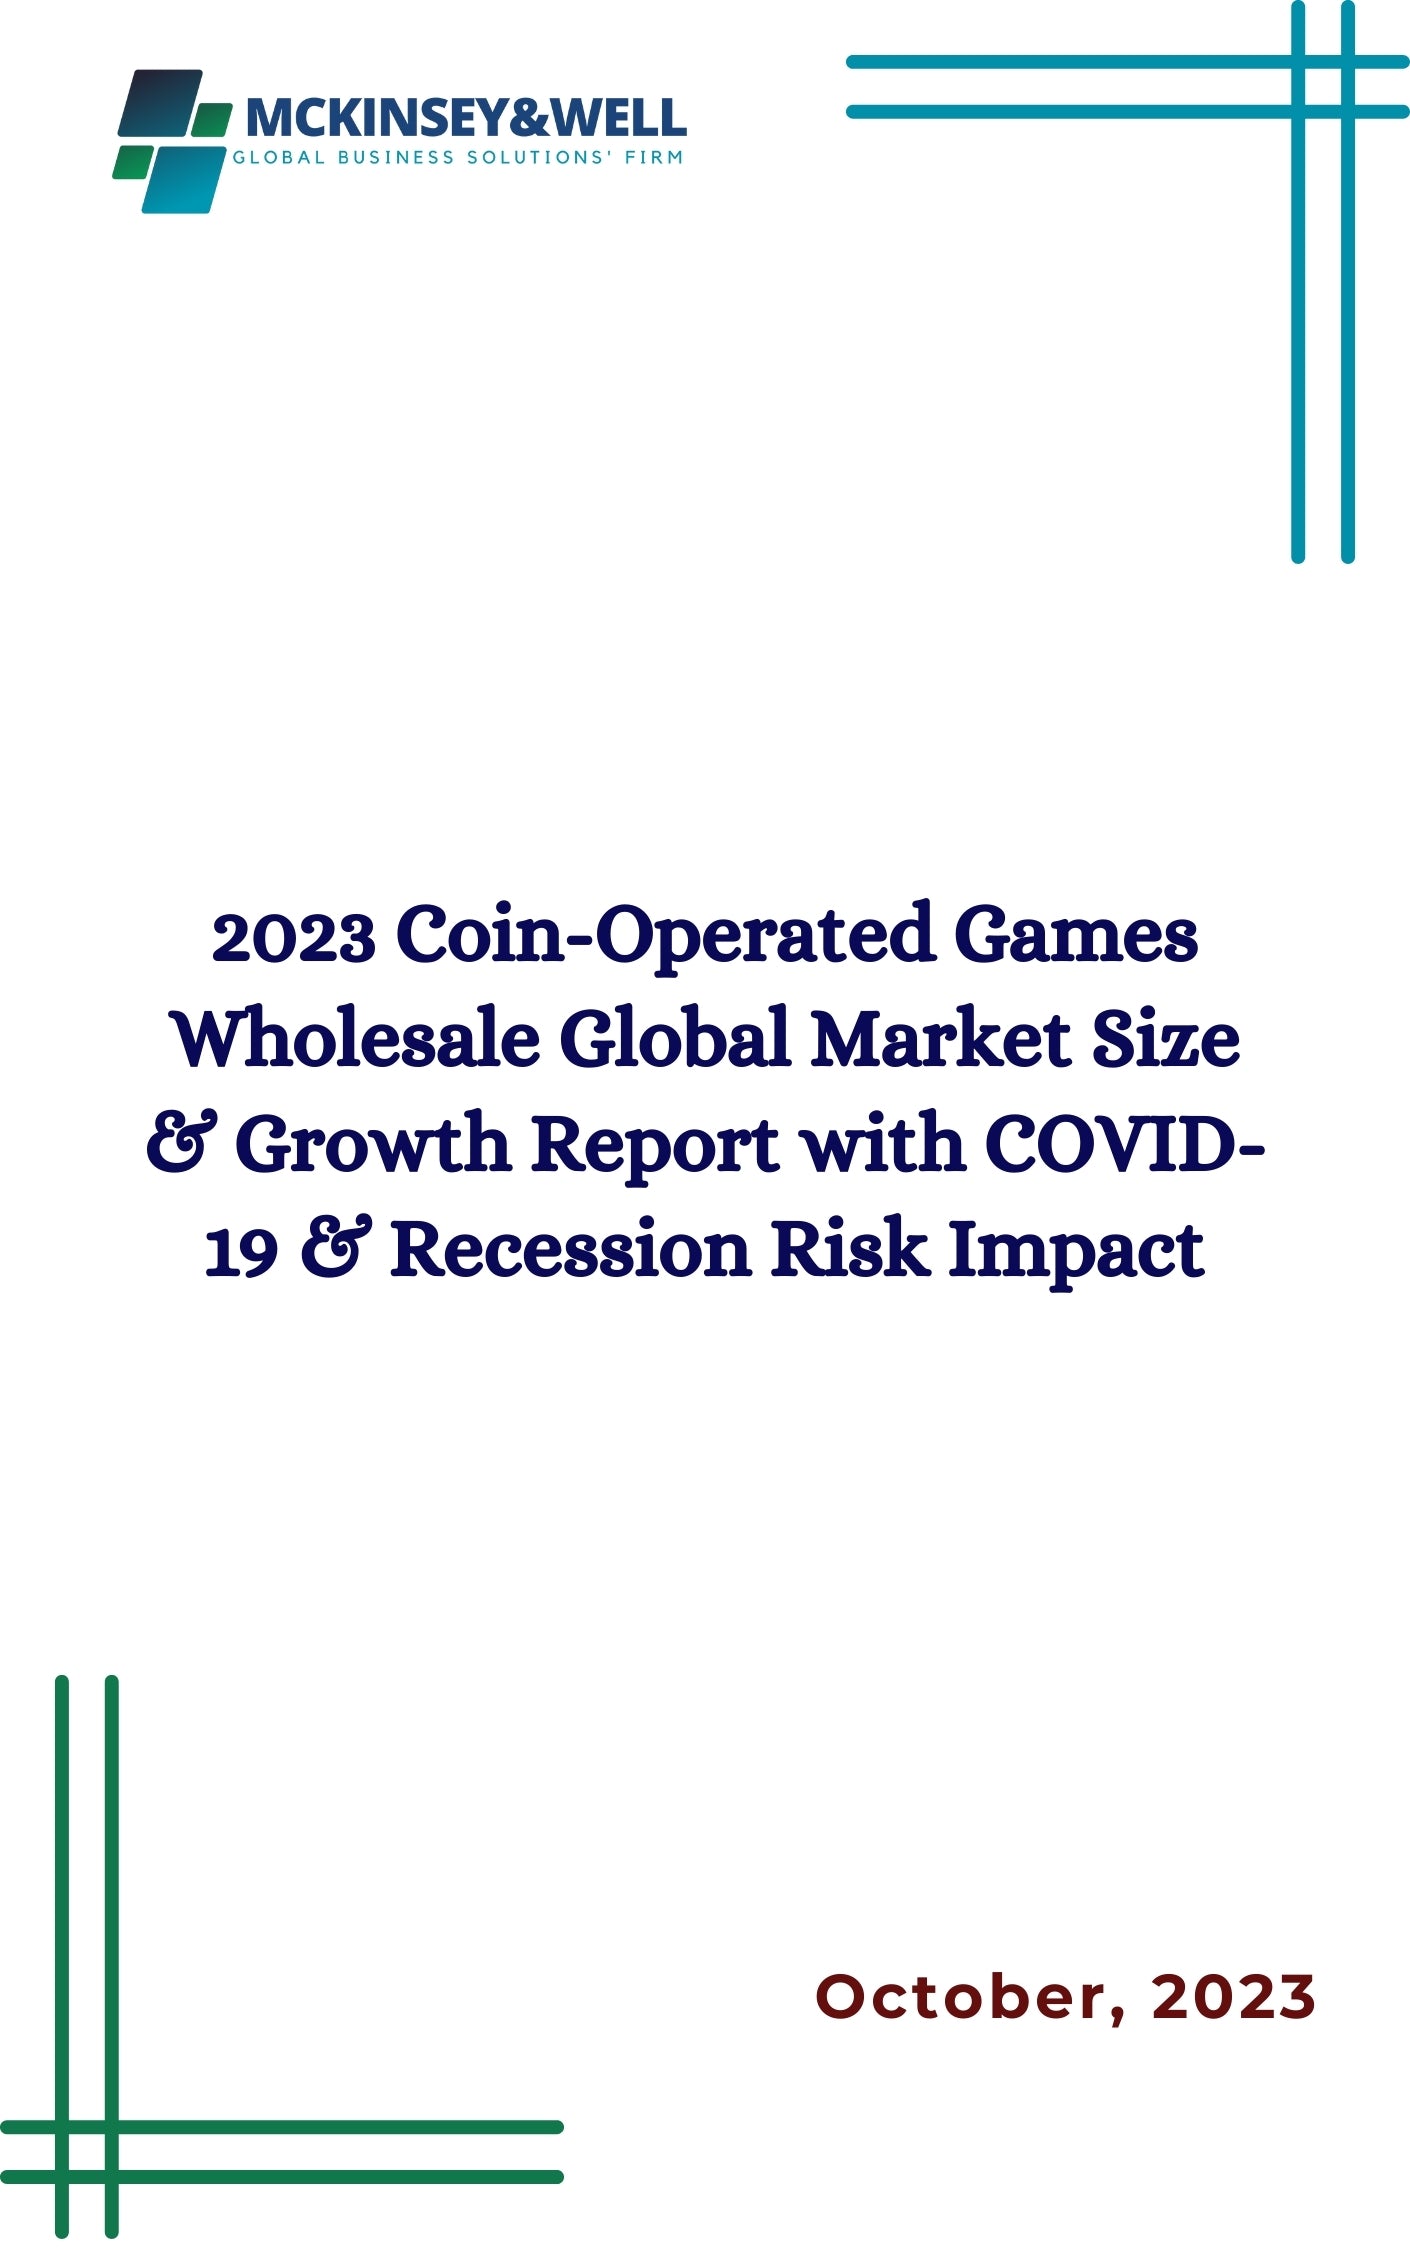 2023 Coin-Operated Games Wholesale Global Market Size & Growth Report with COVID-19 & Recession Risk Impact